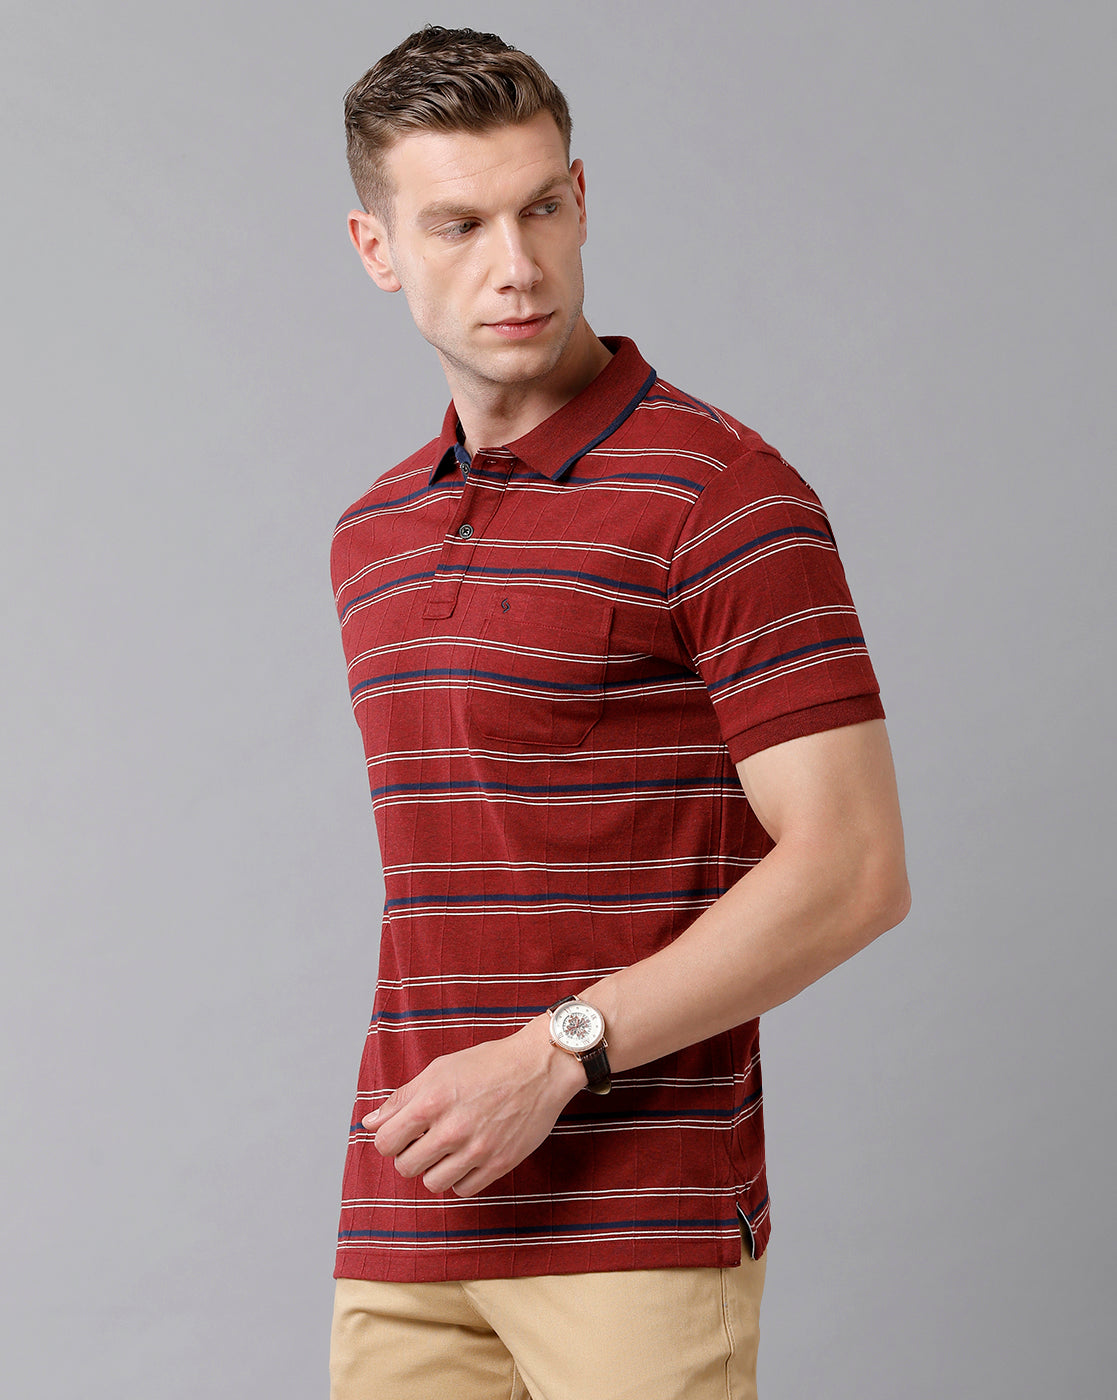 Classic Polo Men's Cotton Striped Half Sleeve Slim Fit Polo Neck Maroon Color T-Shirt | Trs - 94 B